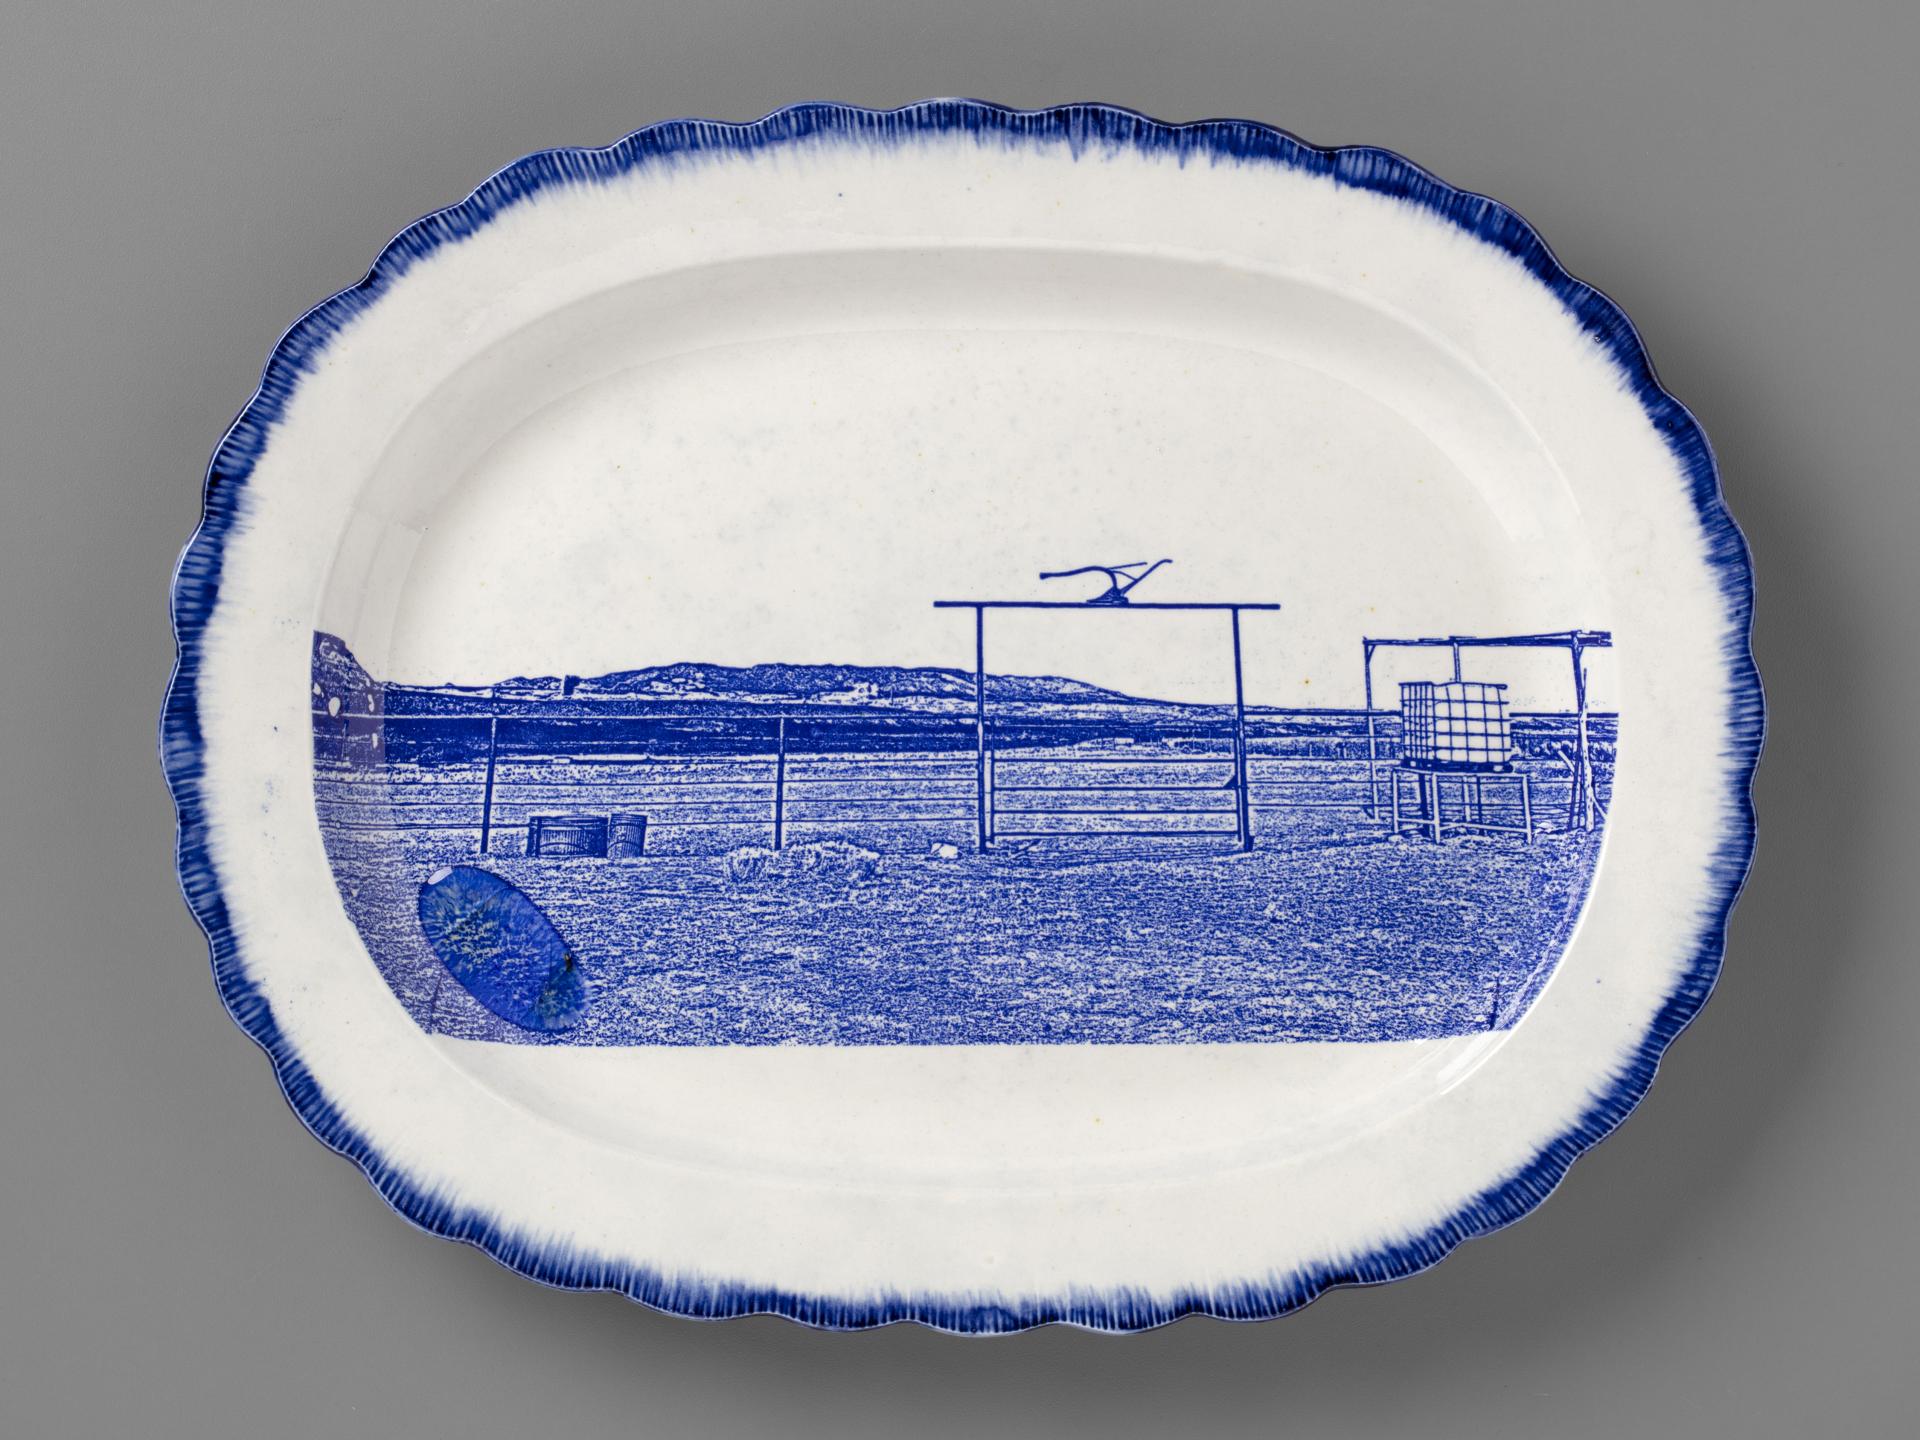 blue and white transferware platter depicting a farmstead near Cove, AZ, with melted Uranium glass on the surface